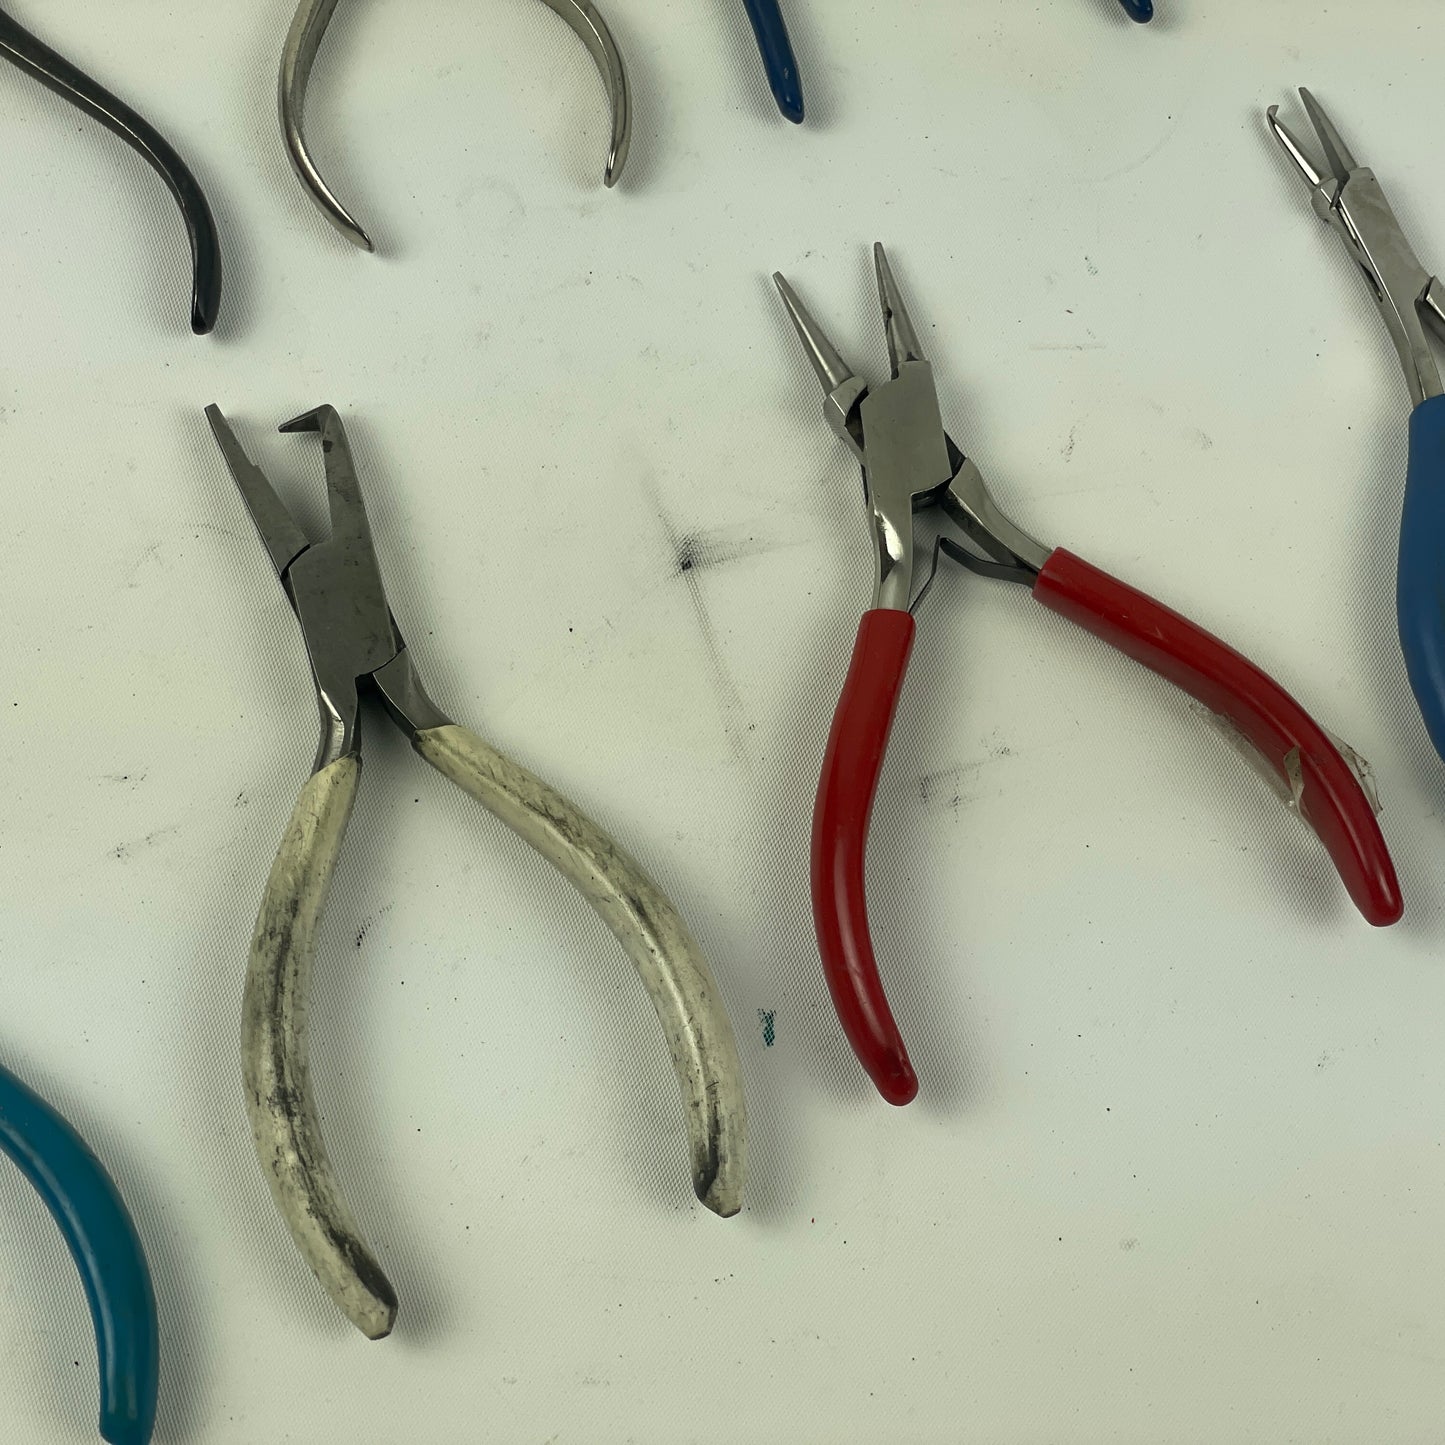 May Lot 60- Watchmaker’s Selection of Thirteen Pairs of Bench Pliers